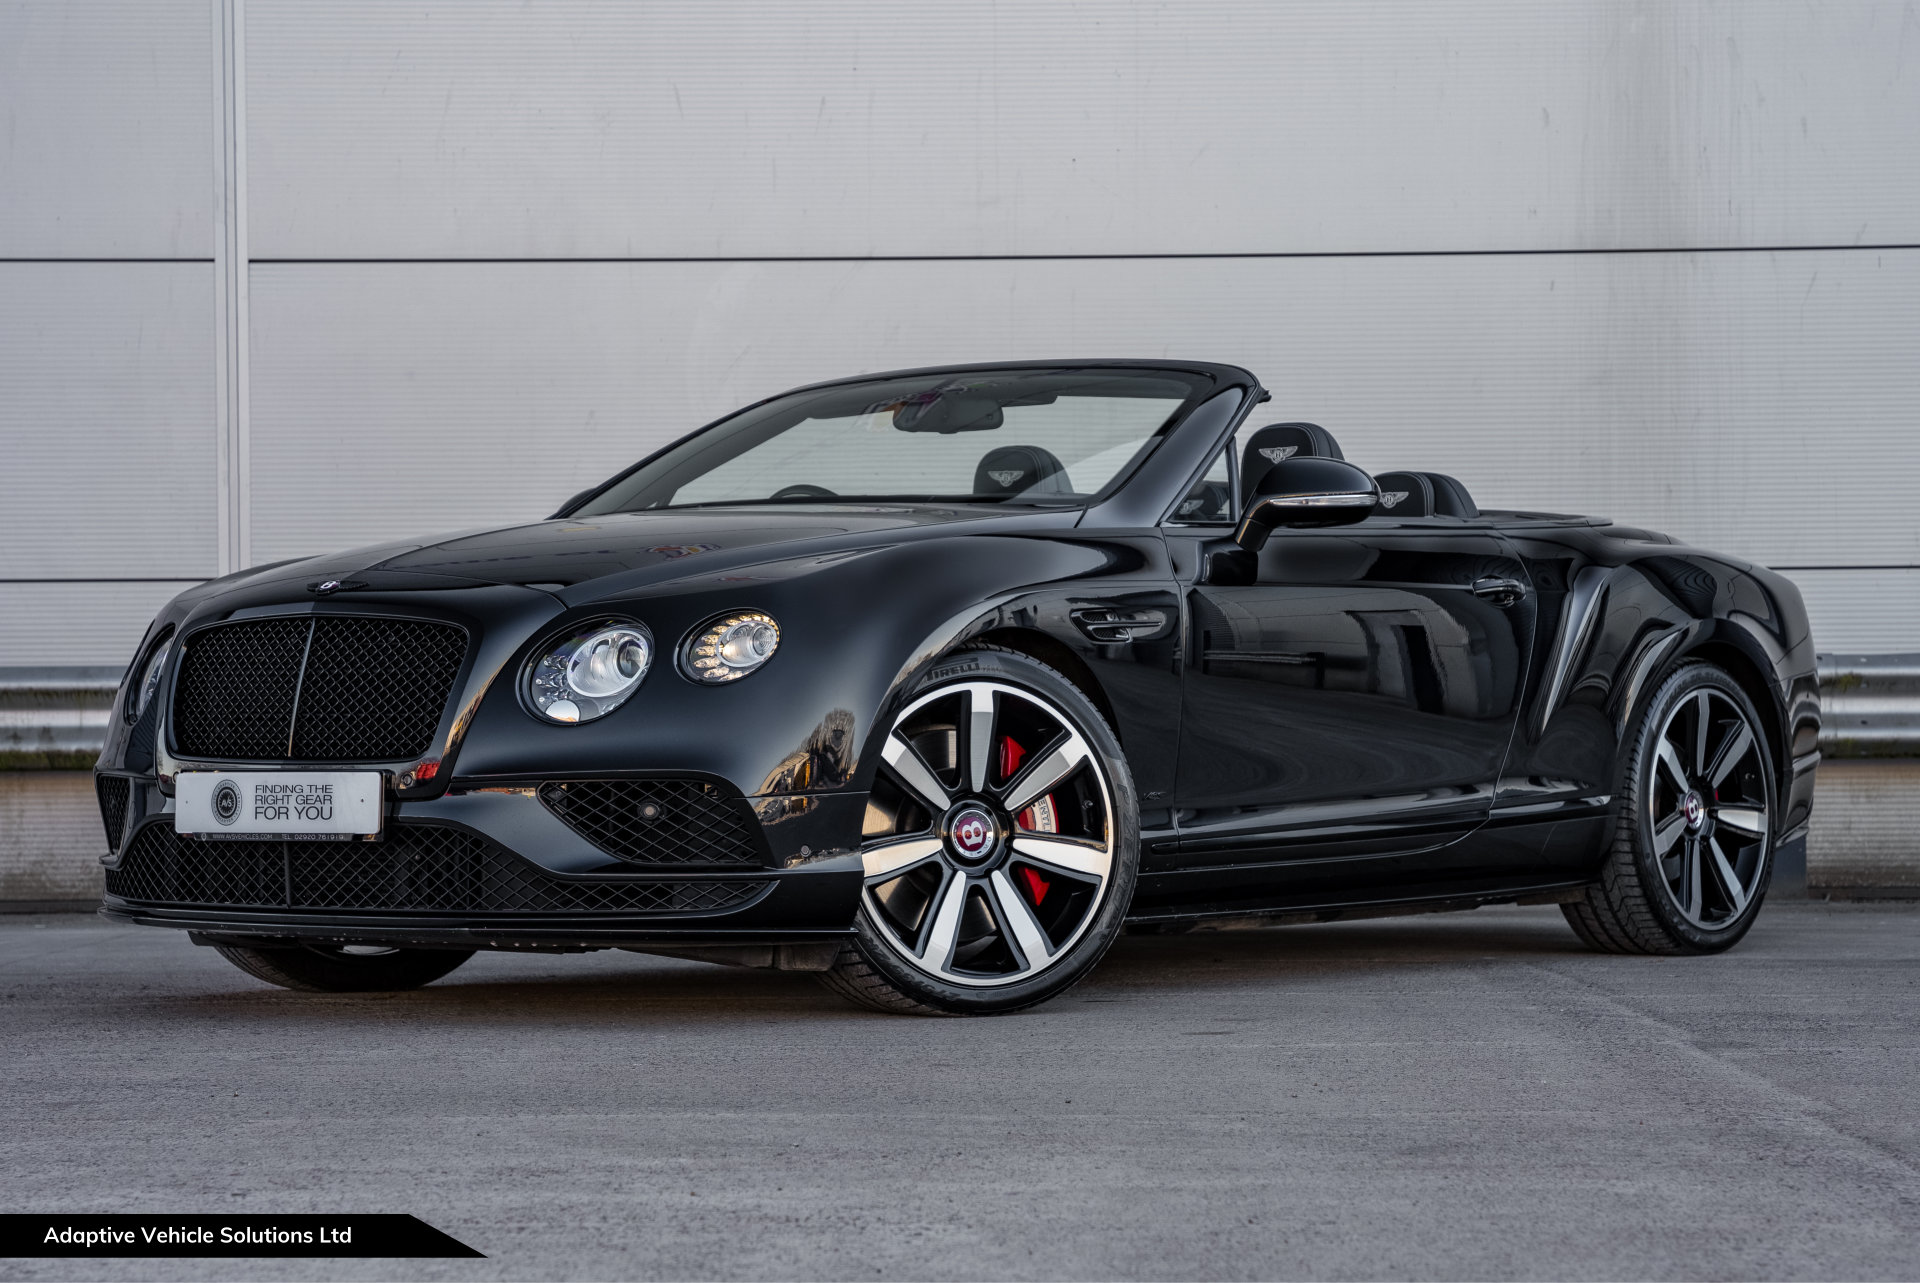 2016 Bentley Continental GTC V8 S Mulliner DS Black near side front view